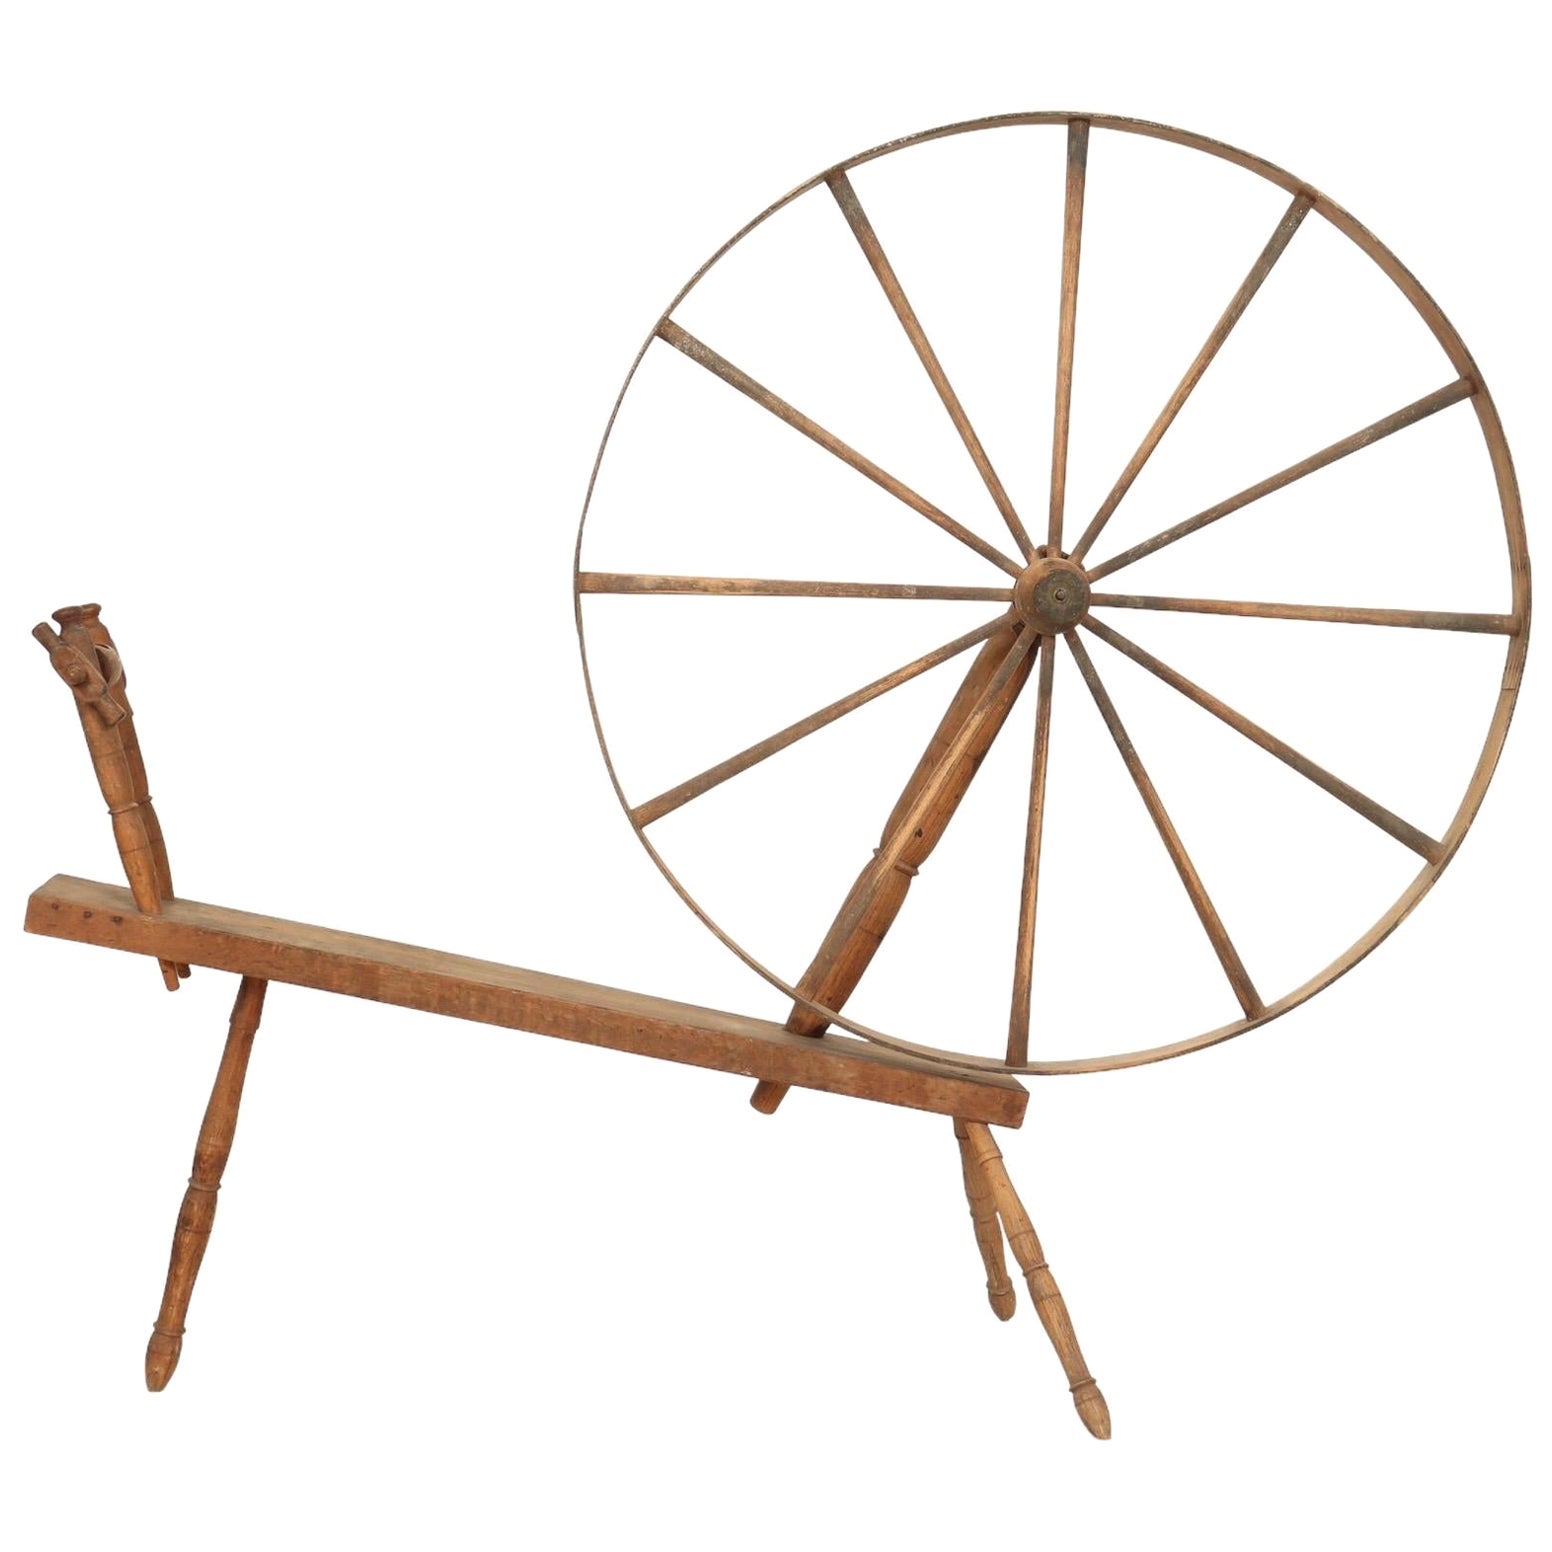 What are the different types of spinning wheels?